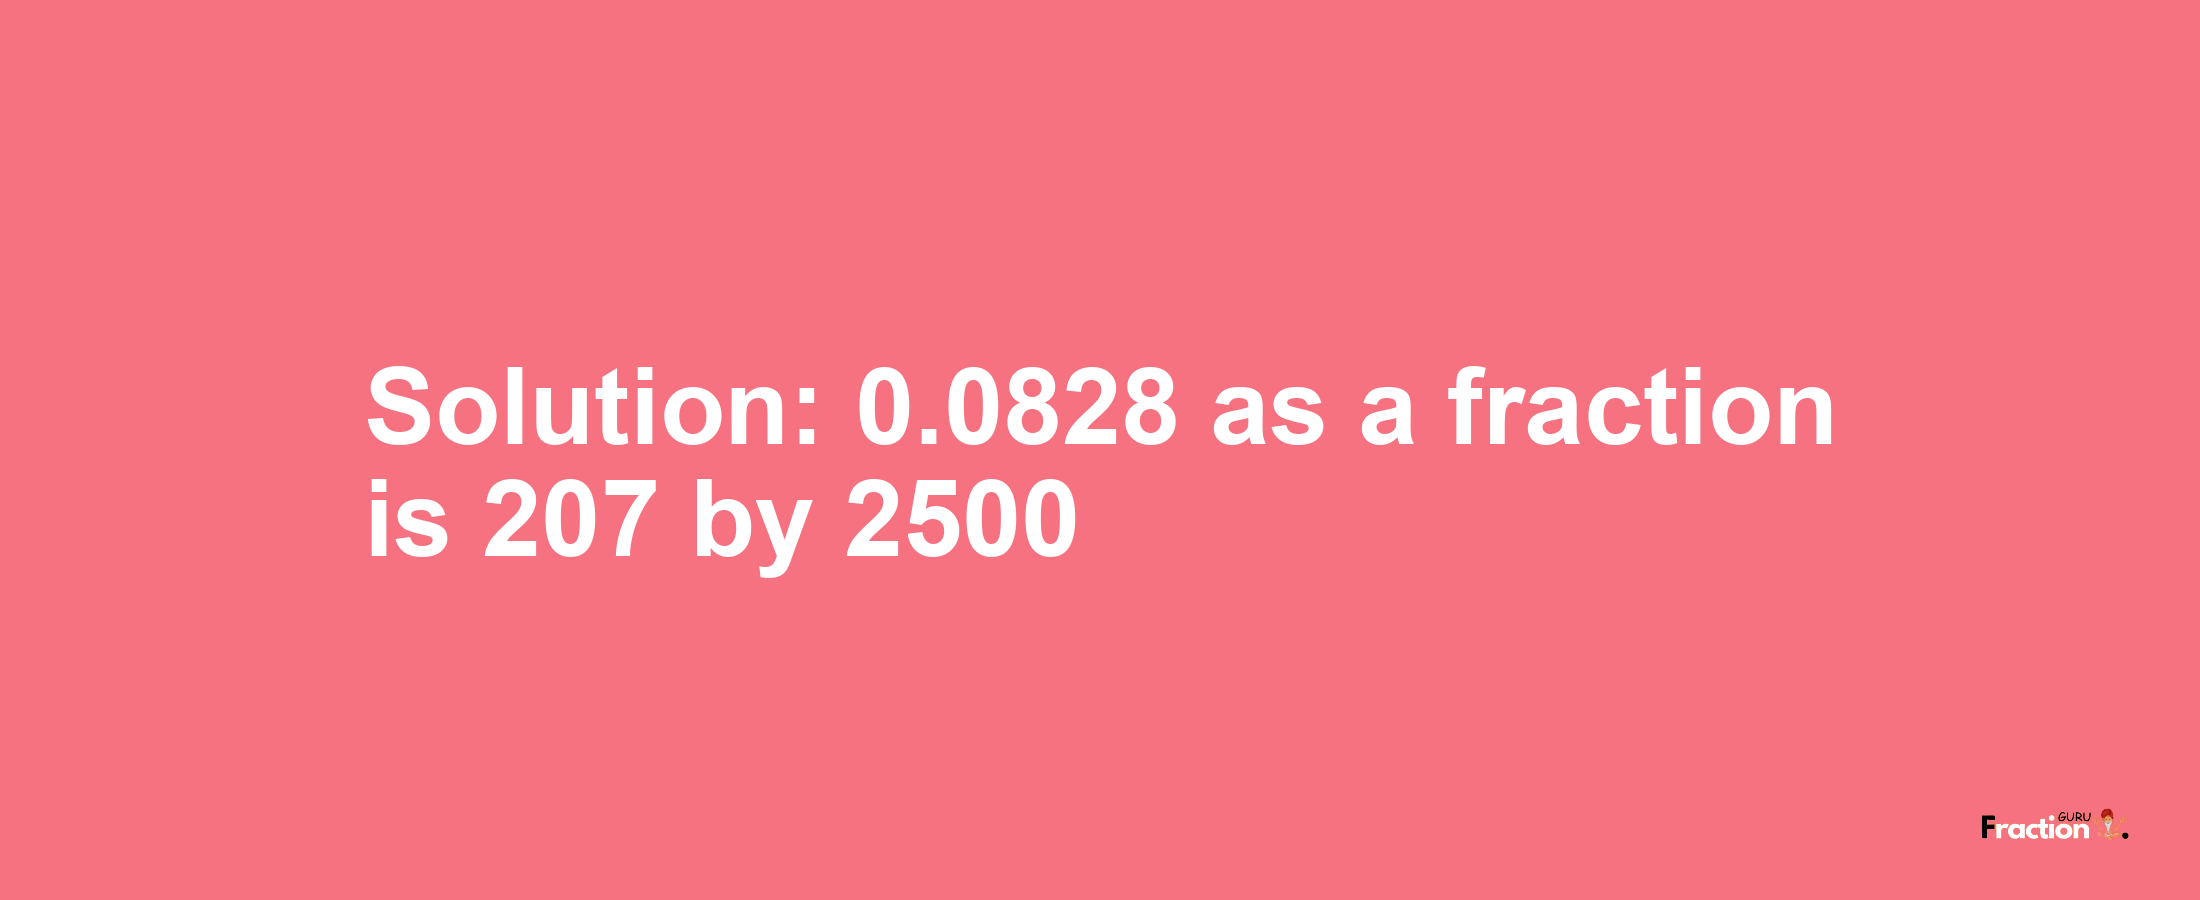 Solution:0.0828 as a fraction is 207/2500